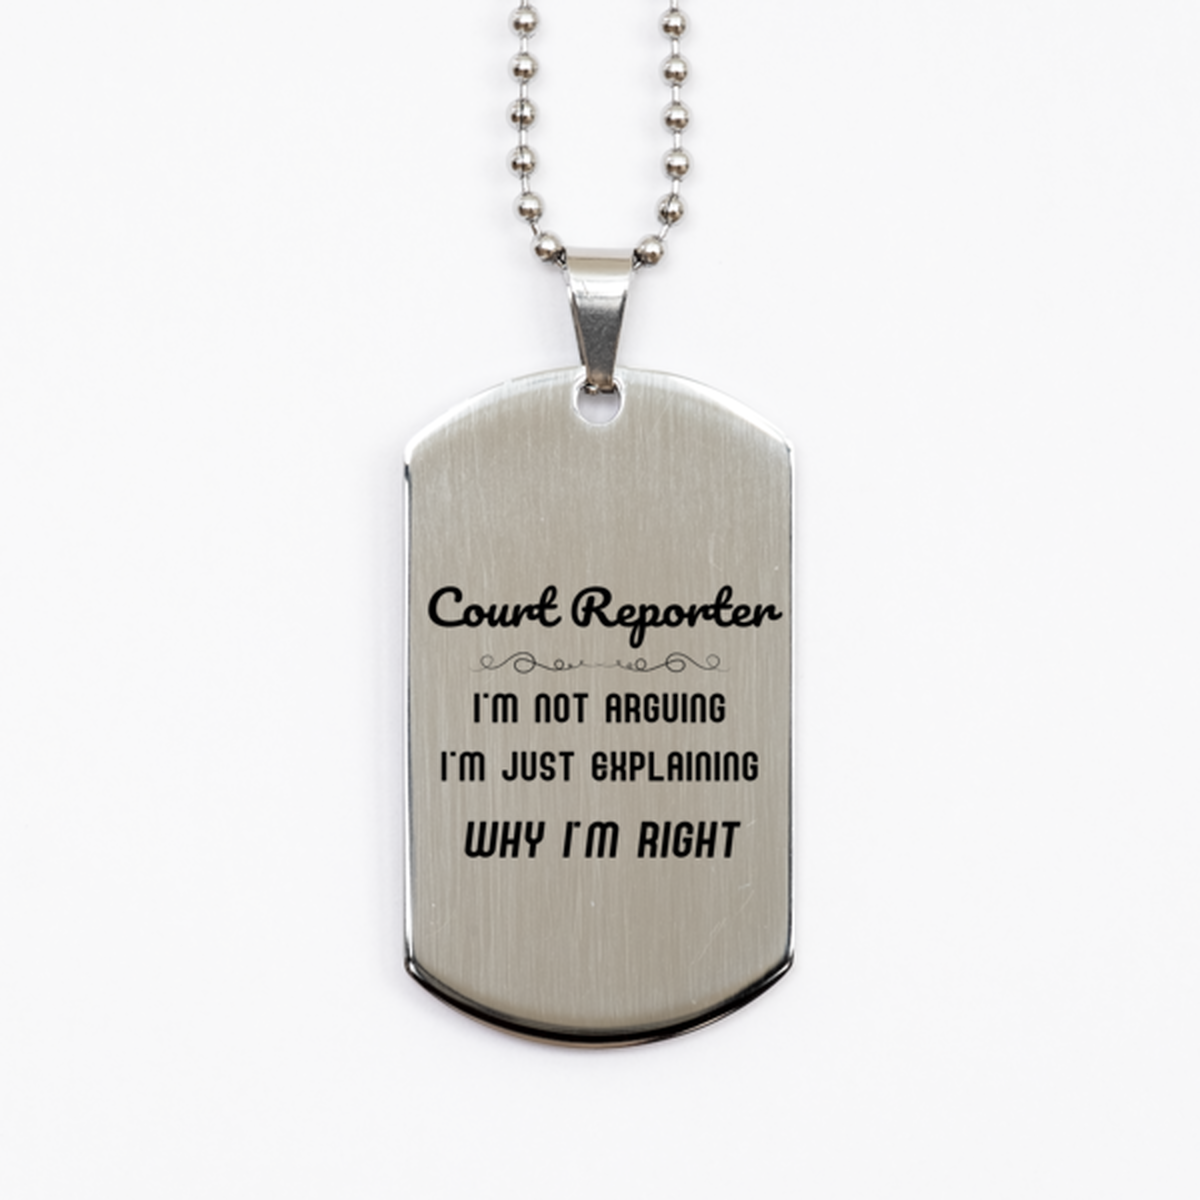 Court Reporter I'm not Arguing. I'm Just Explaining Why I'm RIGHT Silver Dog Tag, Funny Saying Quote Court Reporter Gifts For Court Reporter Graduation Birthday Christmas Gifts for Men Women Coworker